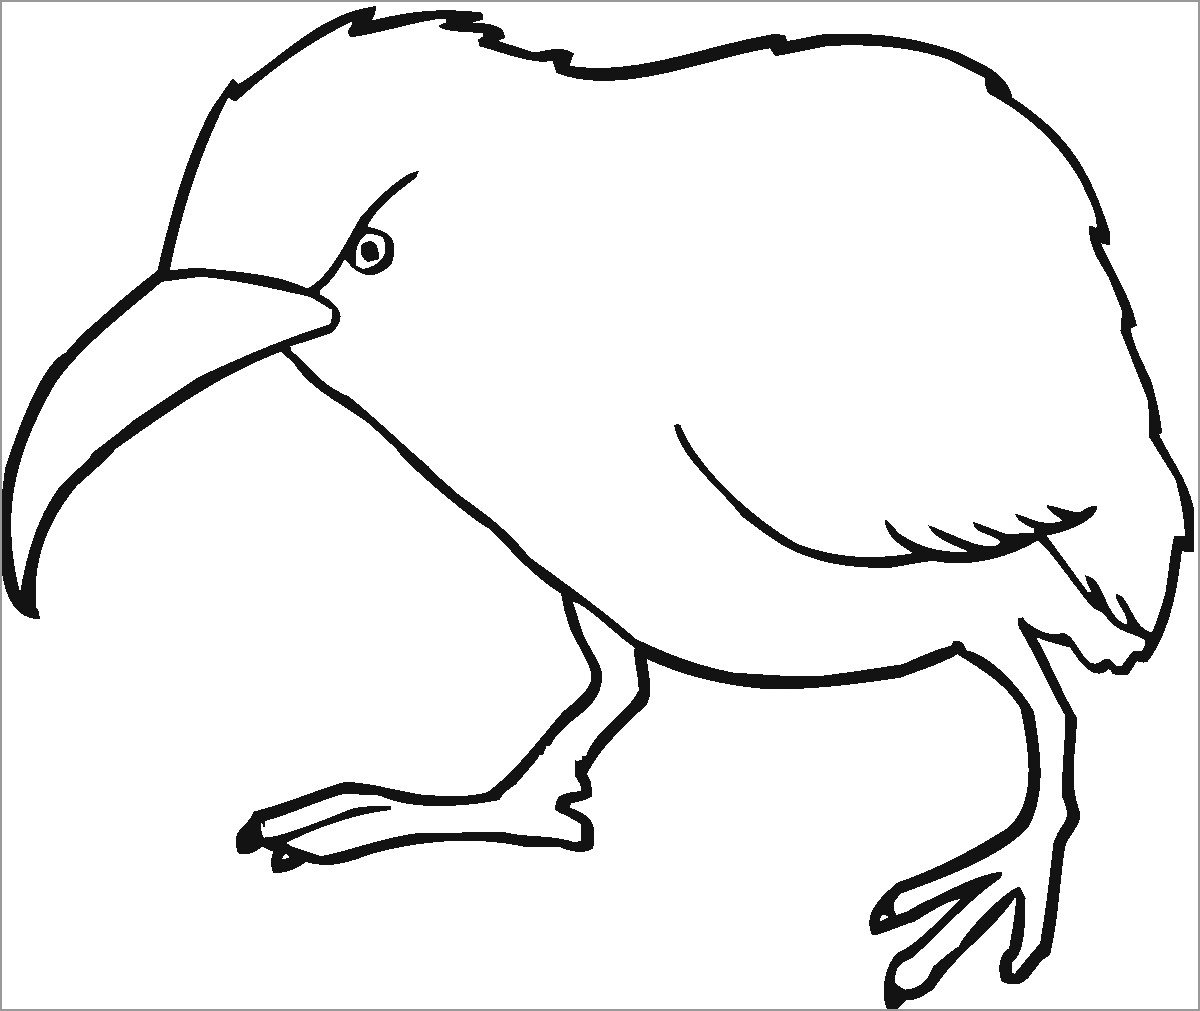 Kiwi Coloring Page for Kids